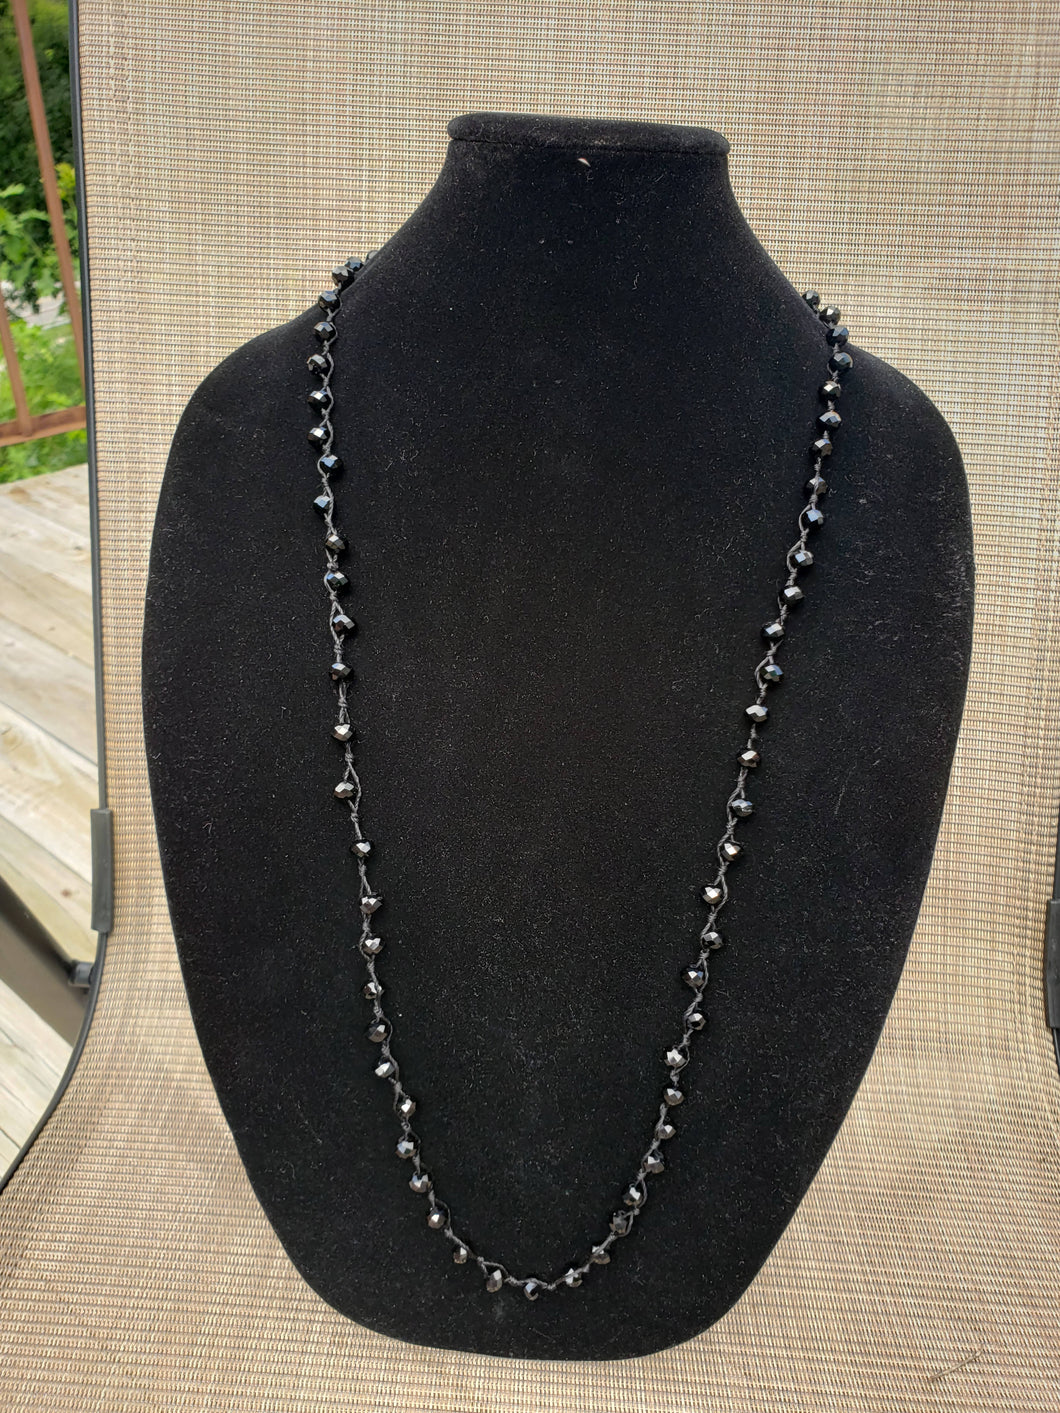 Black Knotted Necklace-N8-36-0006